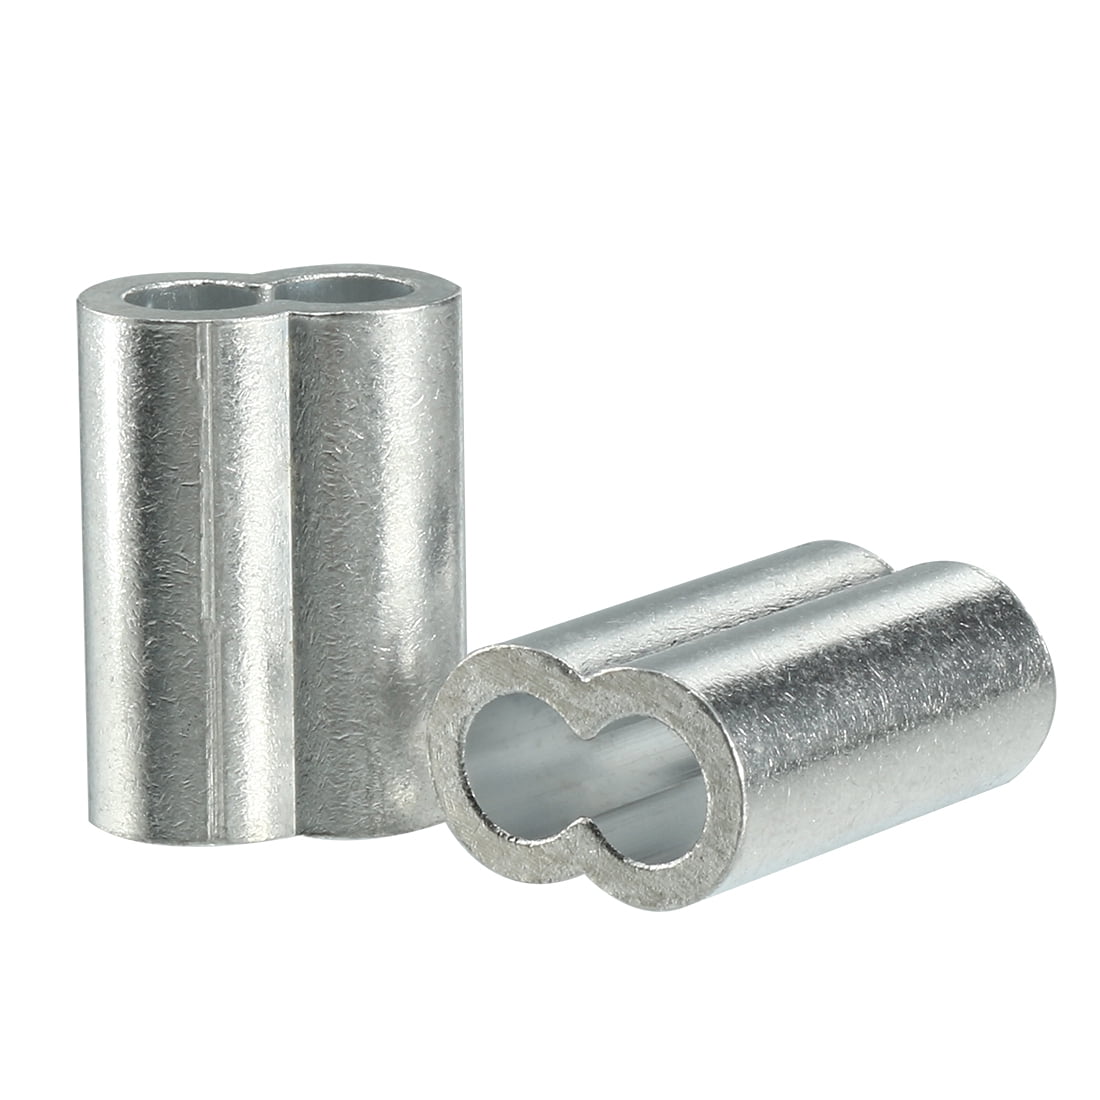 Pack o... Aluminum Crimping Loop Sleeve for 3/16" Diameter Wire Rope and Cable, 